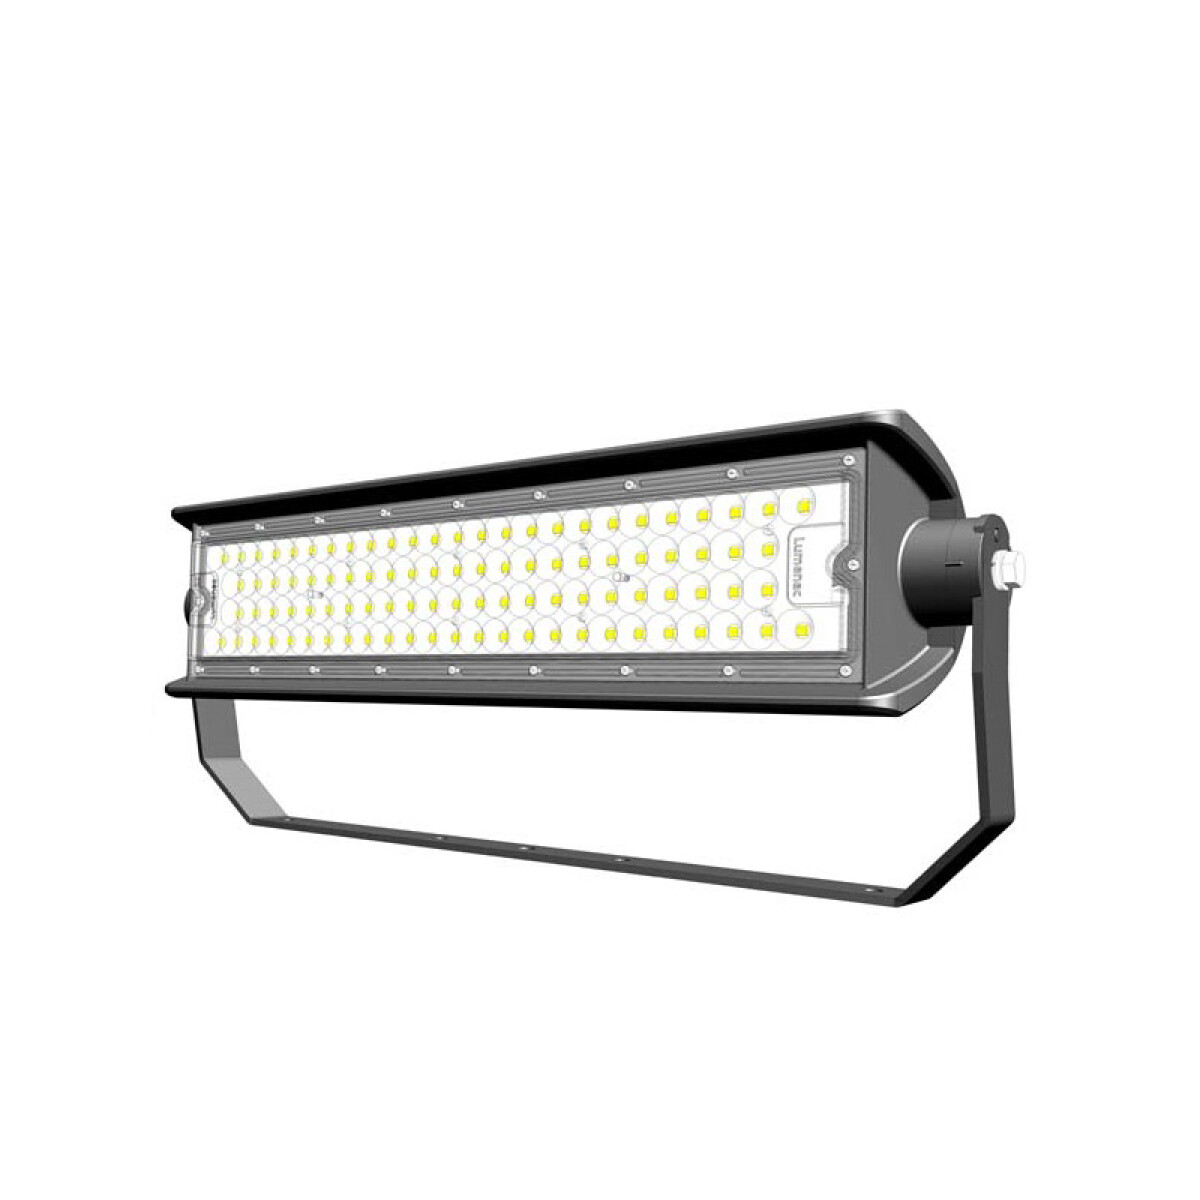 Proyector STADIUM LED ext. 250W 36250Lm fría 60° - AS3251 